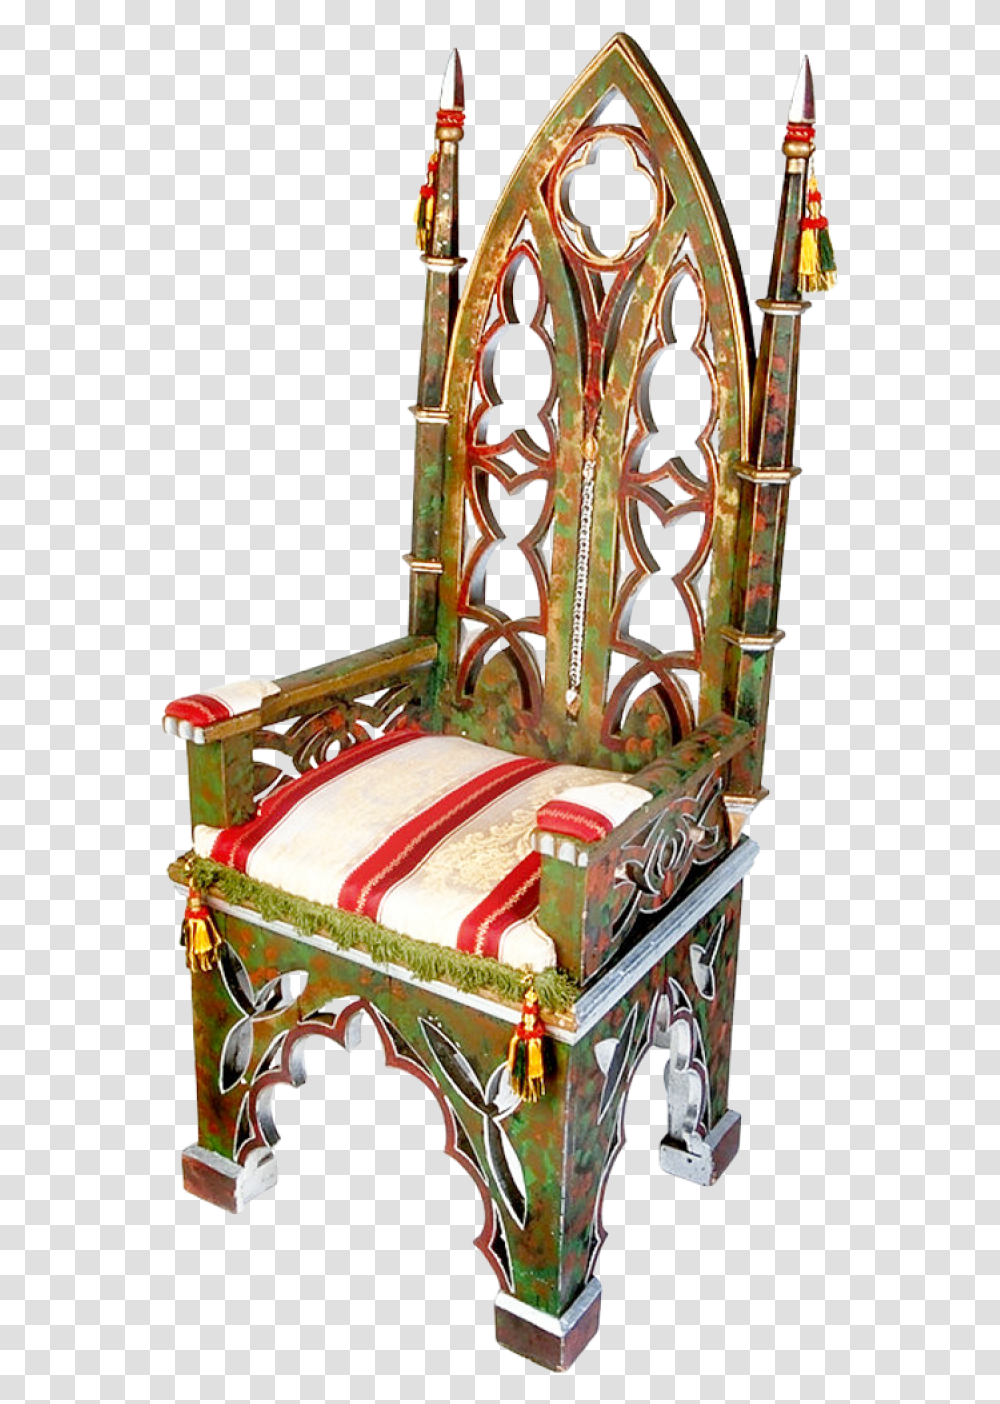 Chair Luxury Image, Furniture, Throne Transparent Png